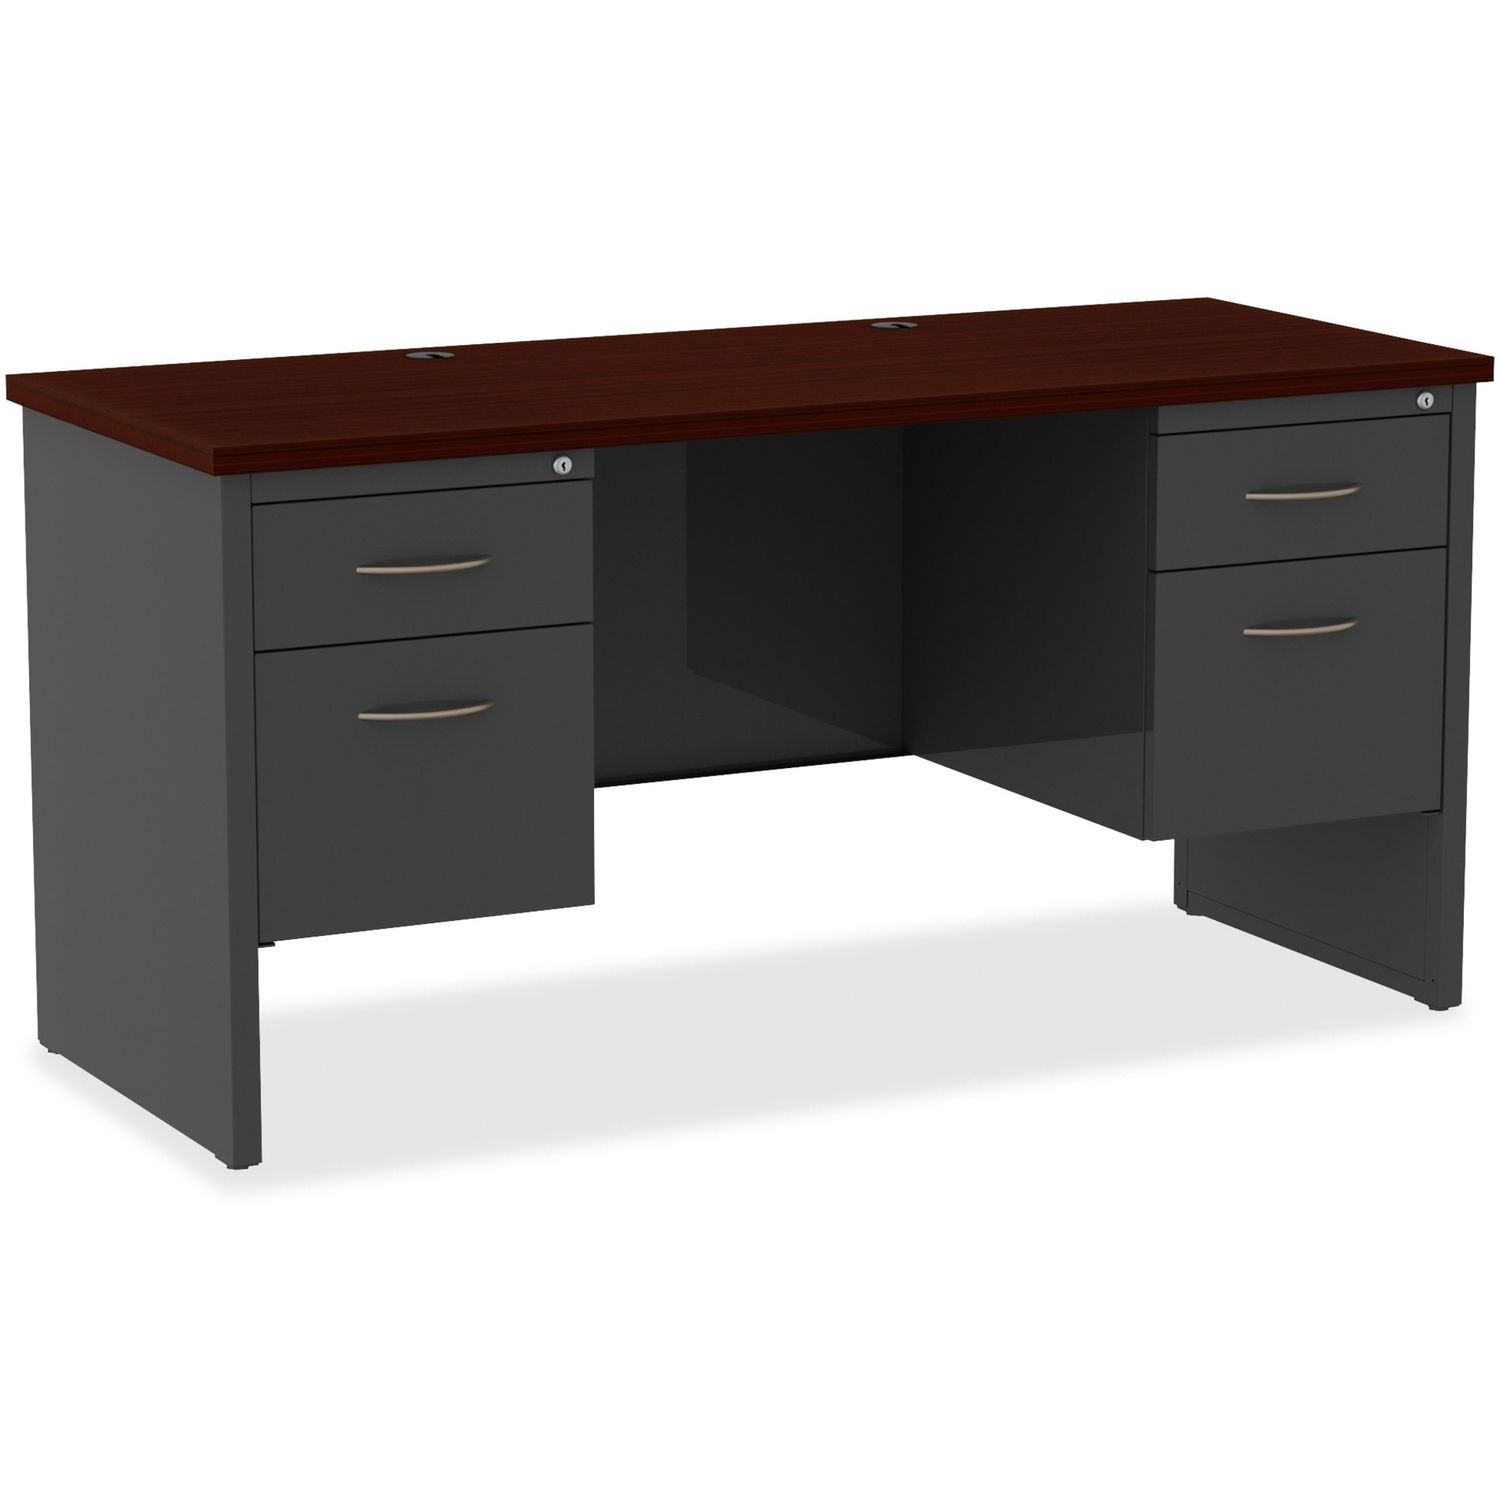 Mahogany Laminate/Charcoal Steel Double-pedestal Credenza - 2-Drawer 60" x 24" , 1.1" Top, 2 x Box Drawer(s), File Drawer(s), Double Pedestal, Material: Steel, Finish: Mahogany Laminate, Charcoal